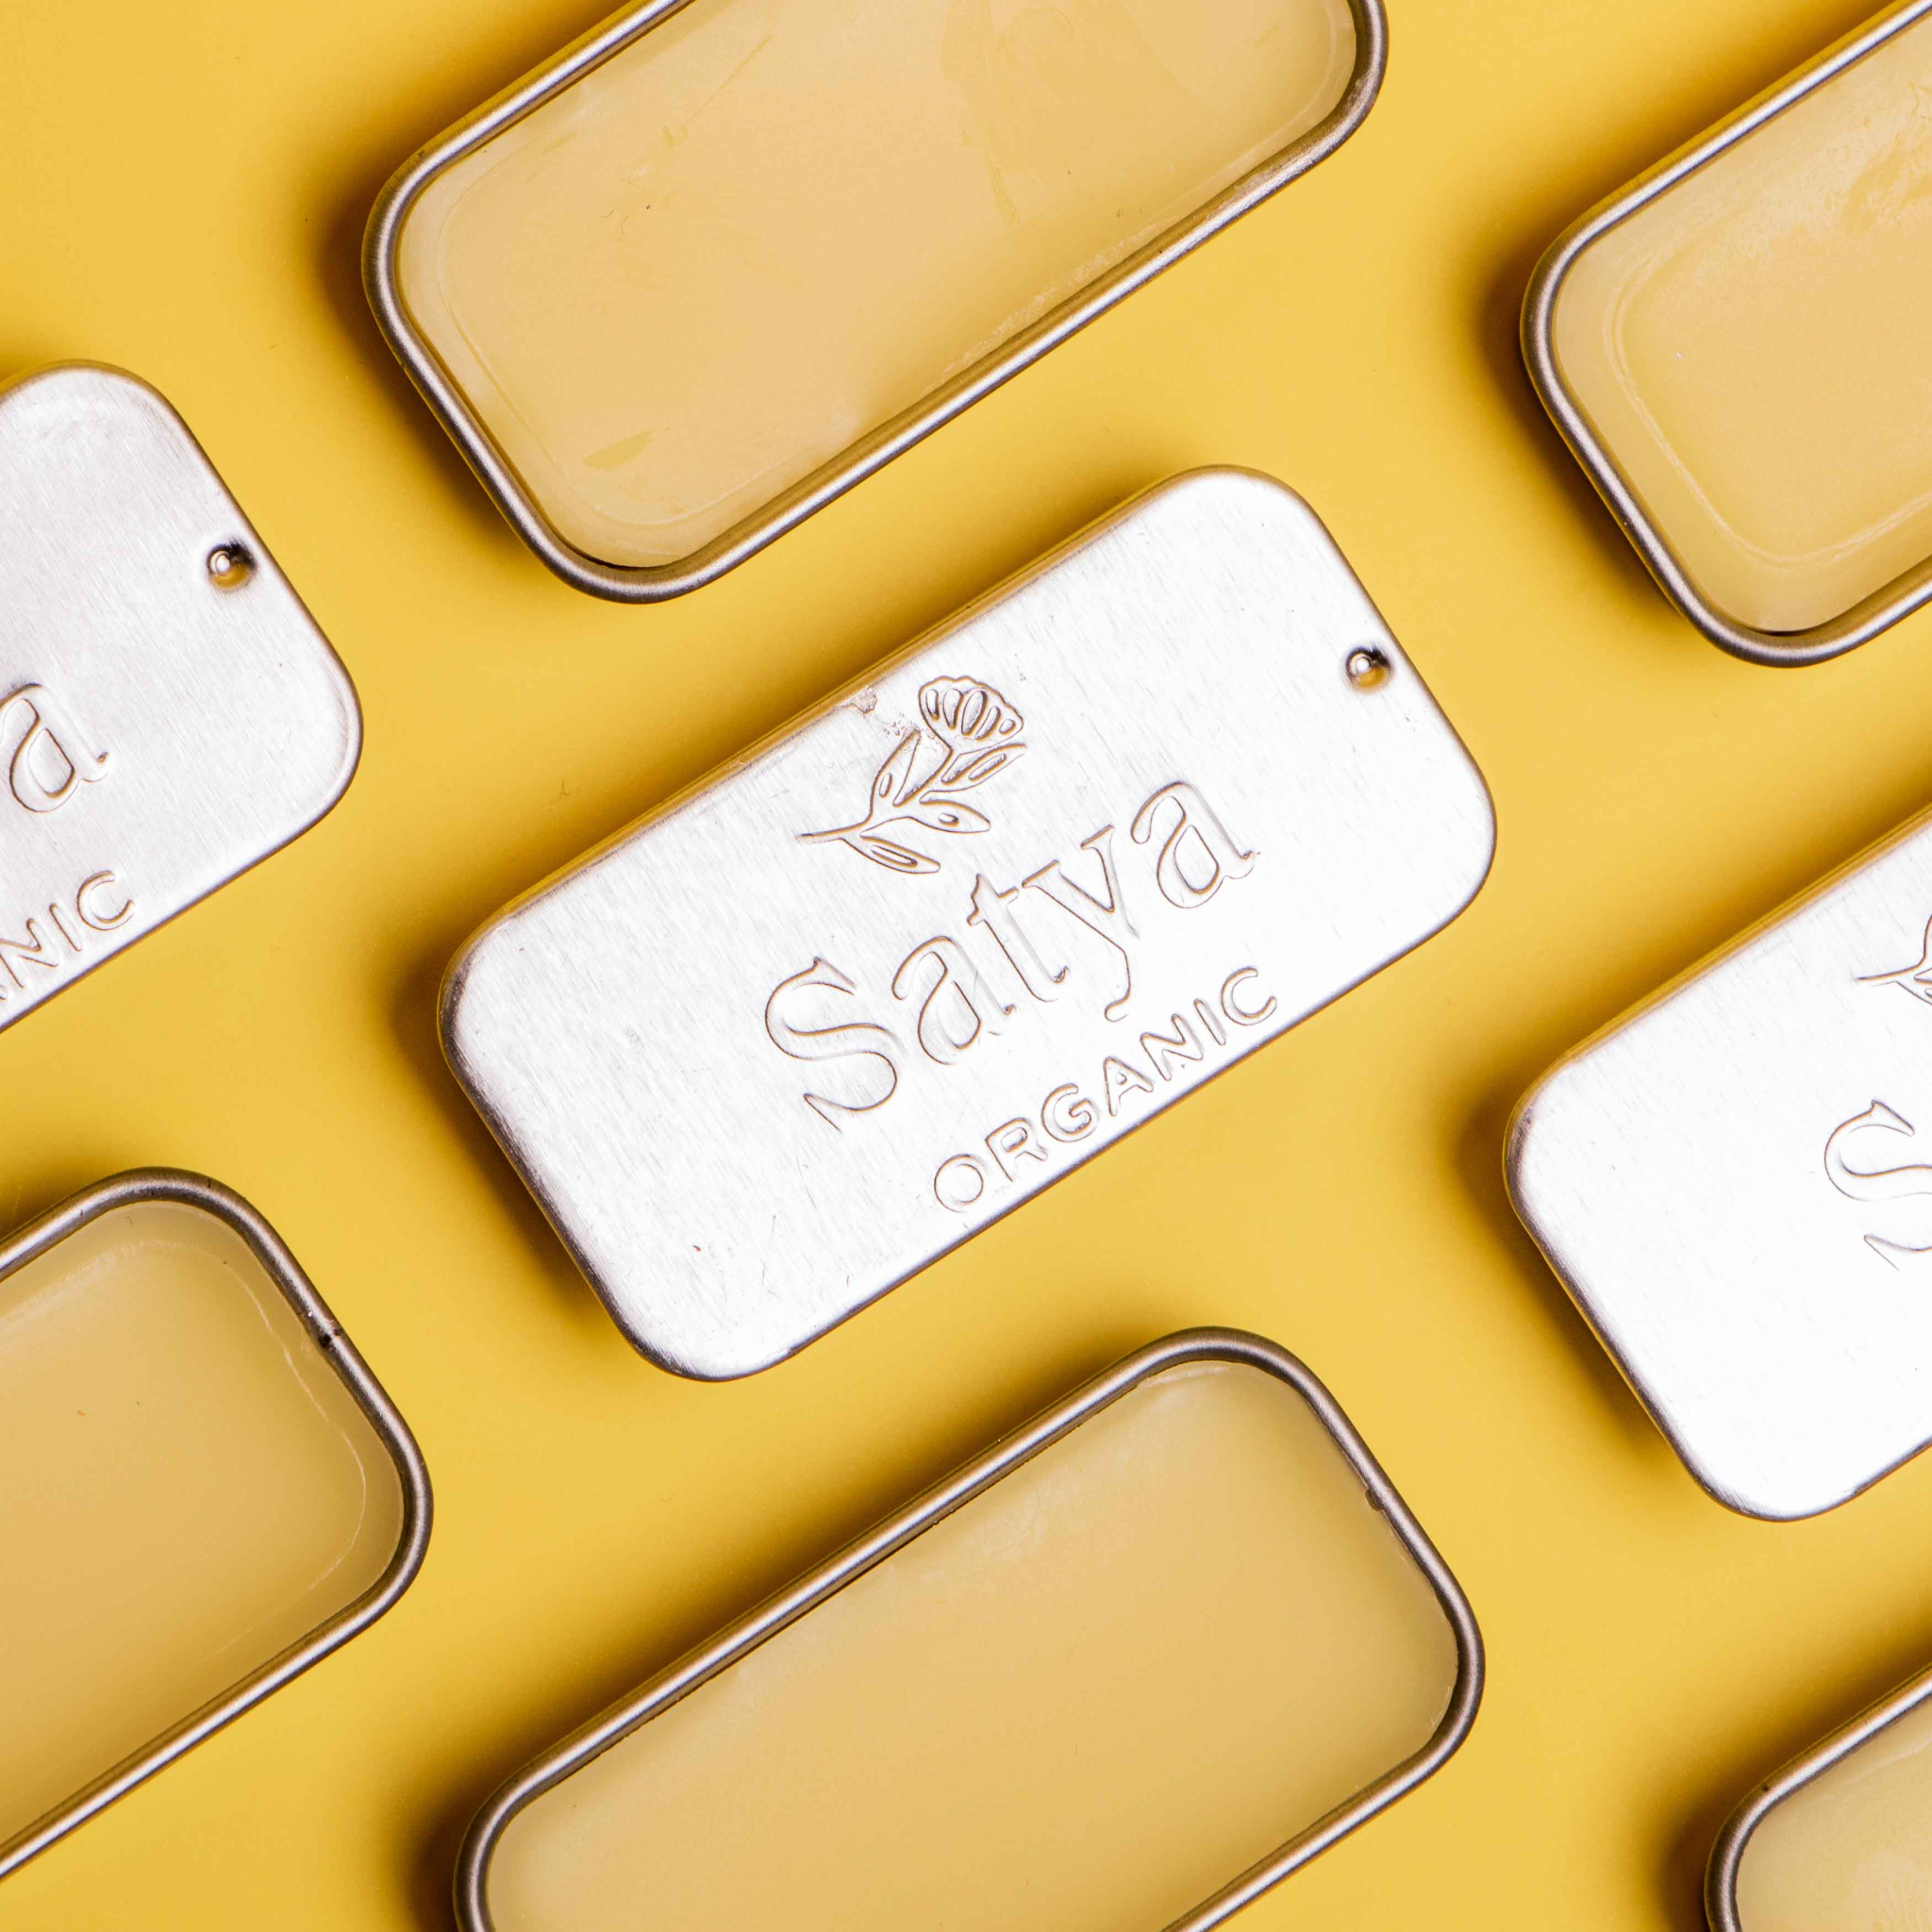 Satya Eczema Relief comes in easy to use tins.